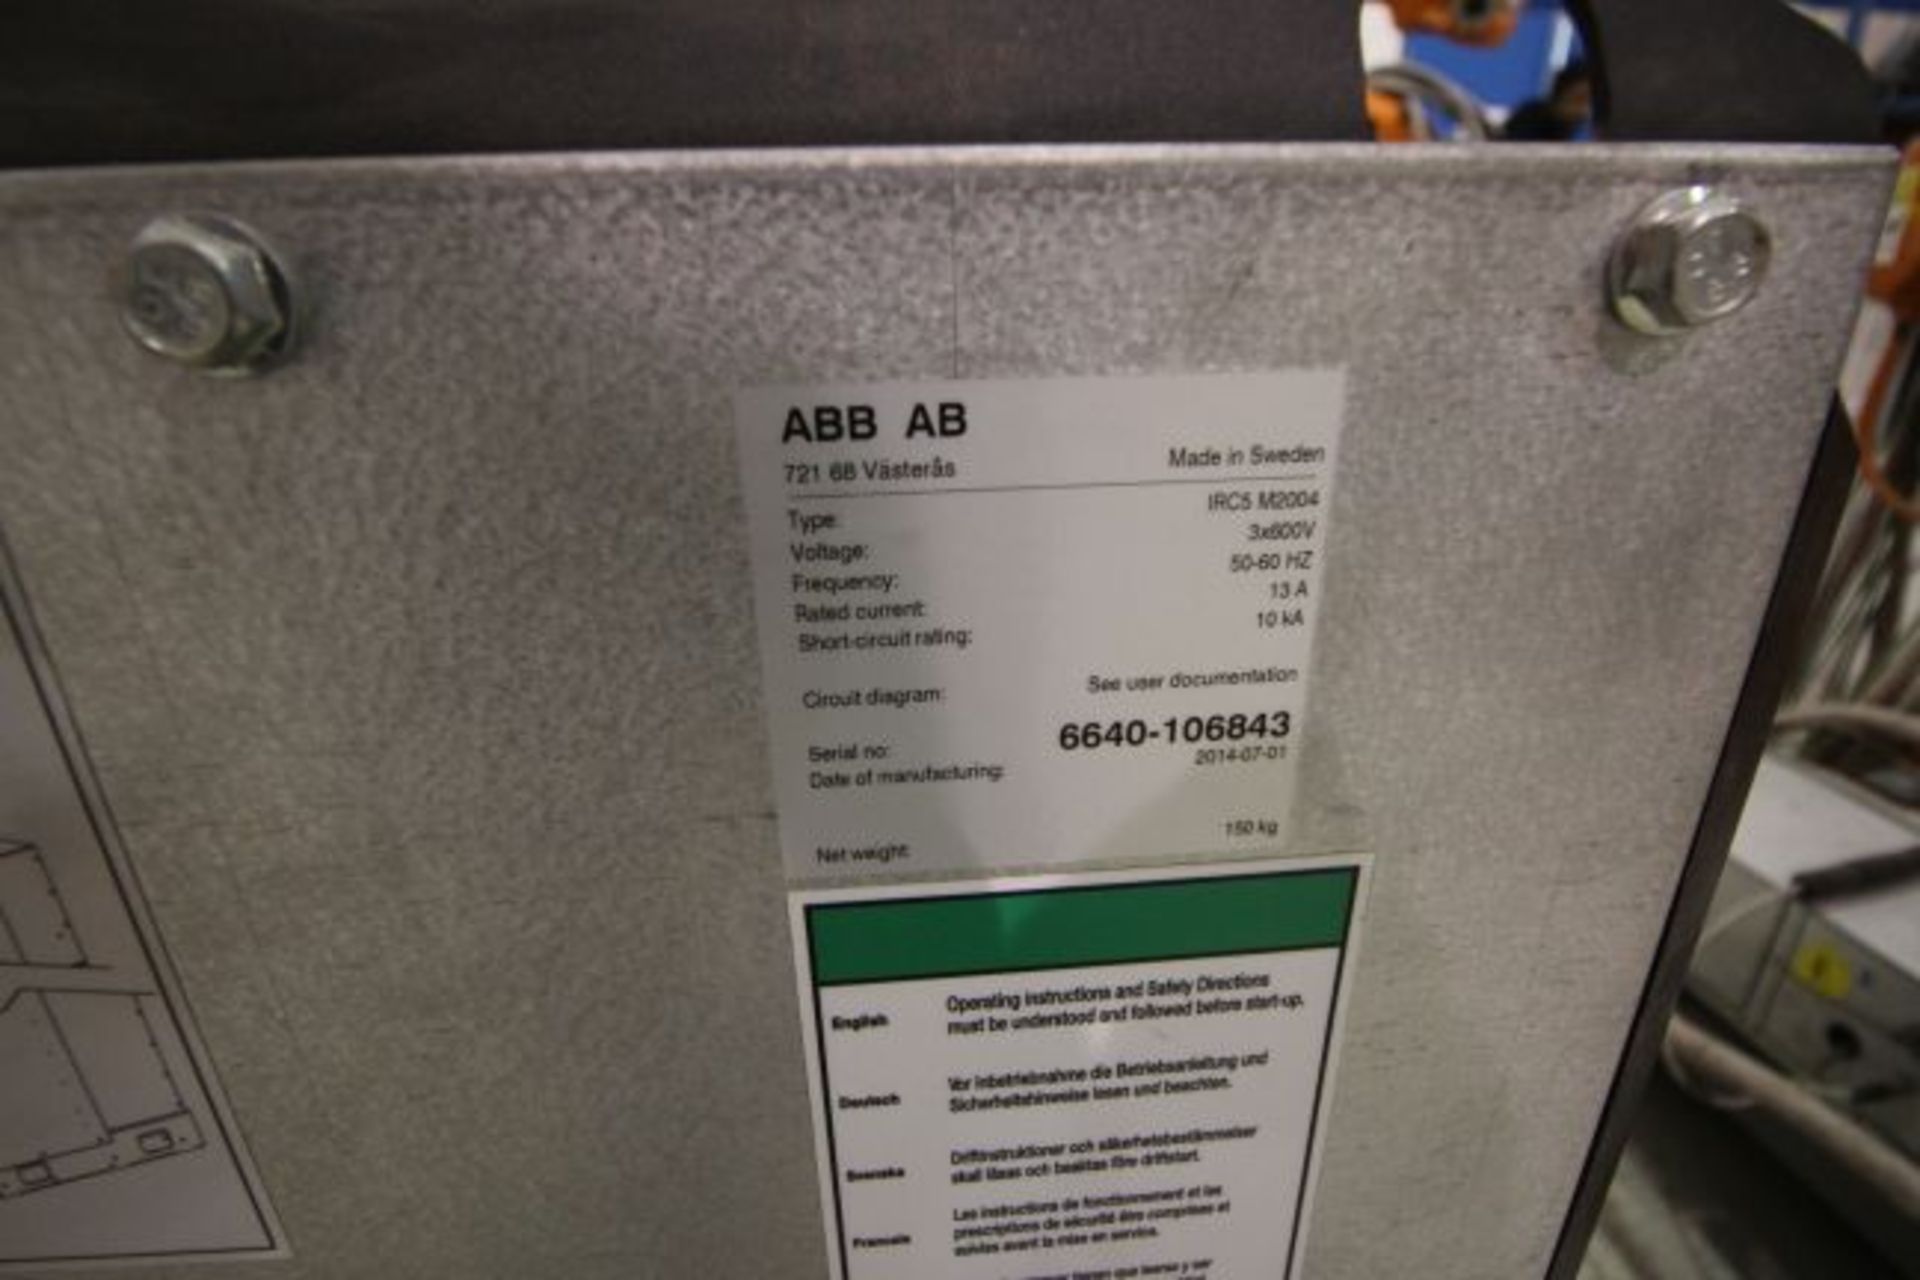 ABB ROBOT IRB 6640 2.8/185 WITH IRC5 CONTROLS, YEAR 2014, SN 106843, TEACH PENDANT & CABLES - Image 11 of 11